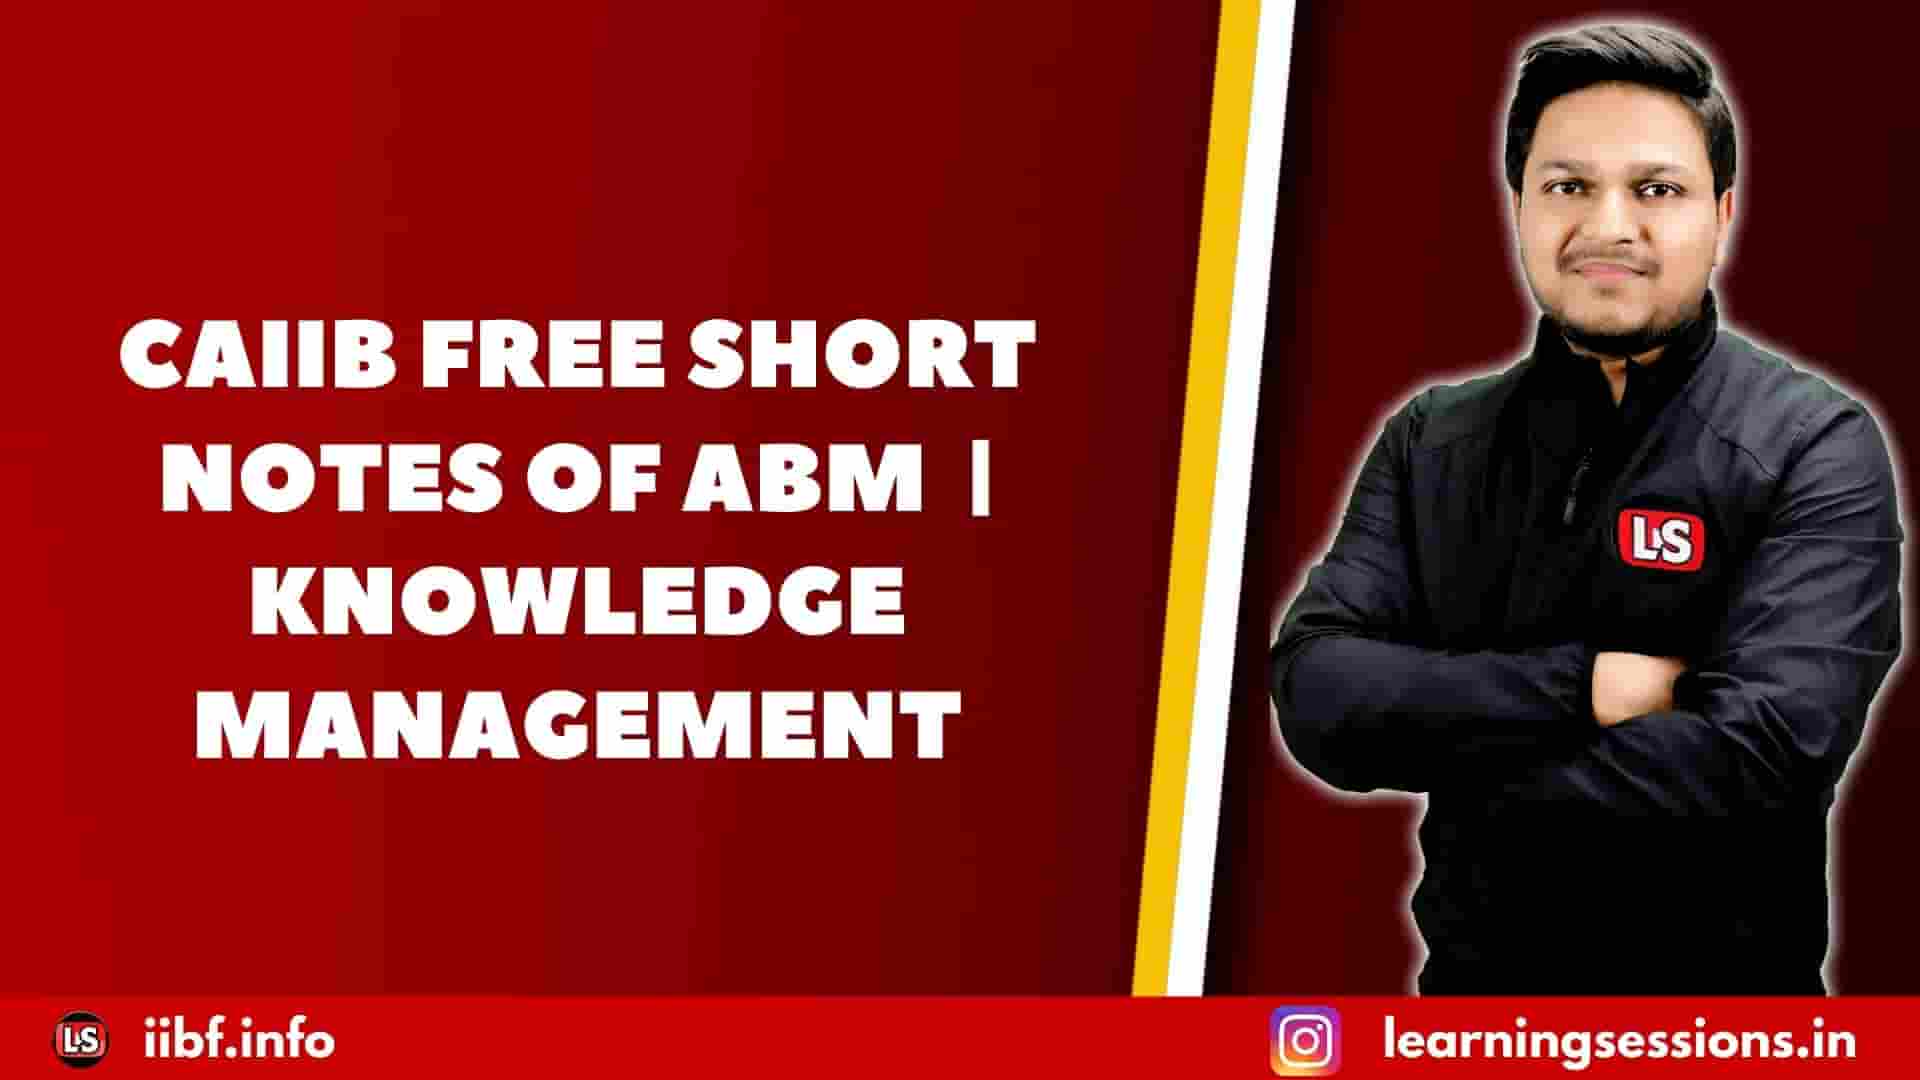 CAIIB FREE SHORT NOTES OF ABM | KNOWLEDGE MANAGEMENT